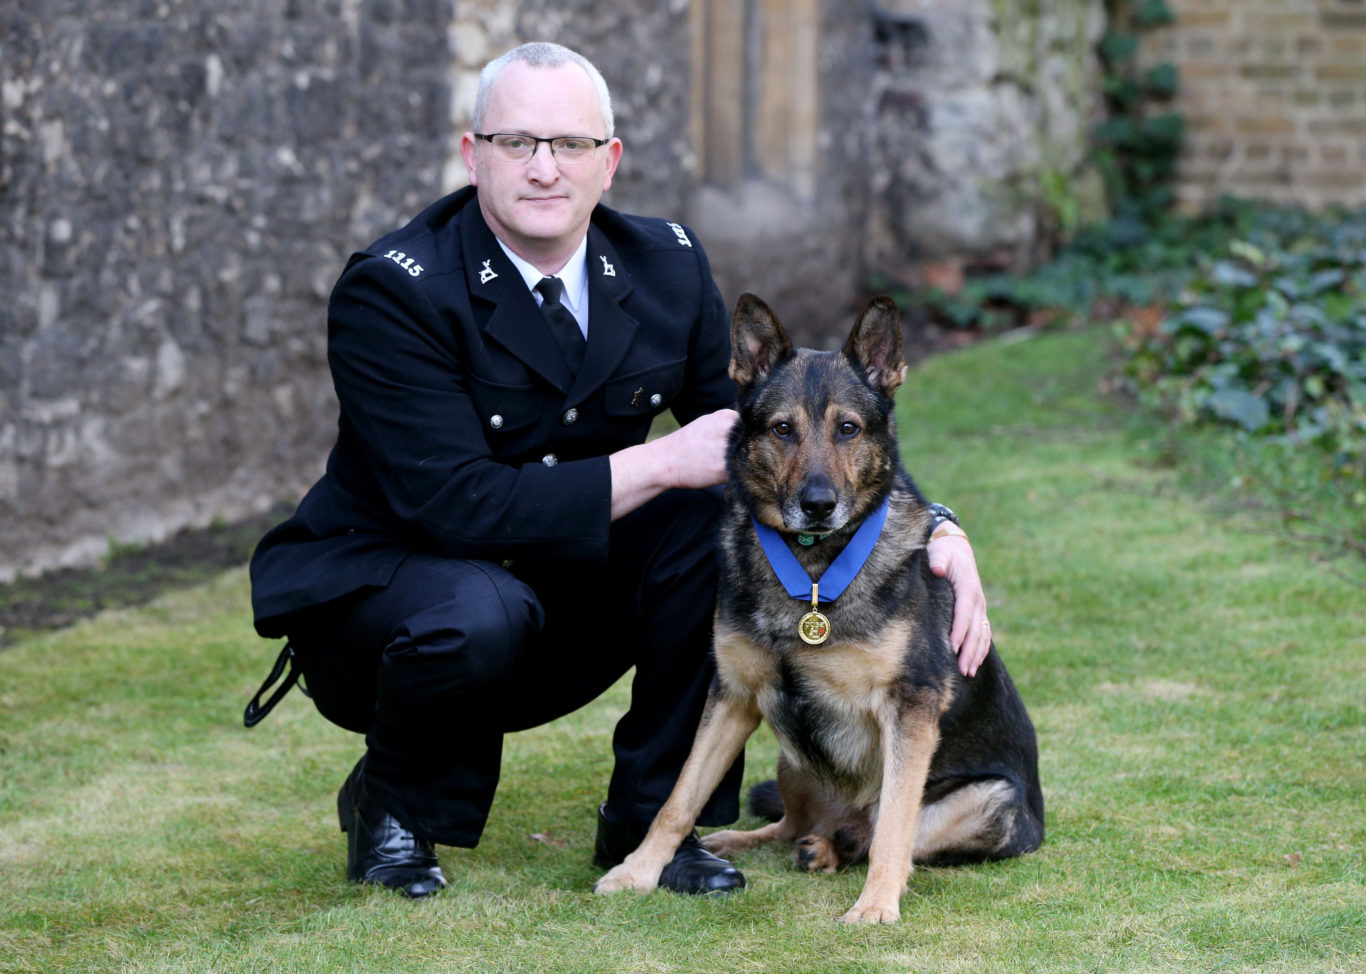 Police dog Finn, which received the PDSA Gold Medal, after being brutally stabbed in the line of duty, with his handler PC Dave Wardell, at Old Palace Yard, Westminster, London. (Jonathan Brady/PA)